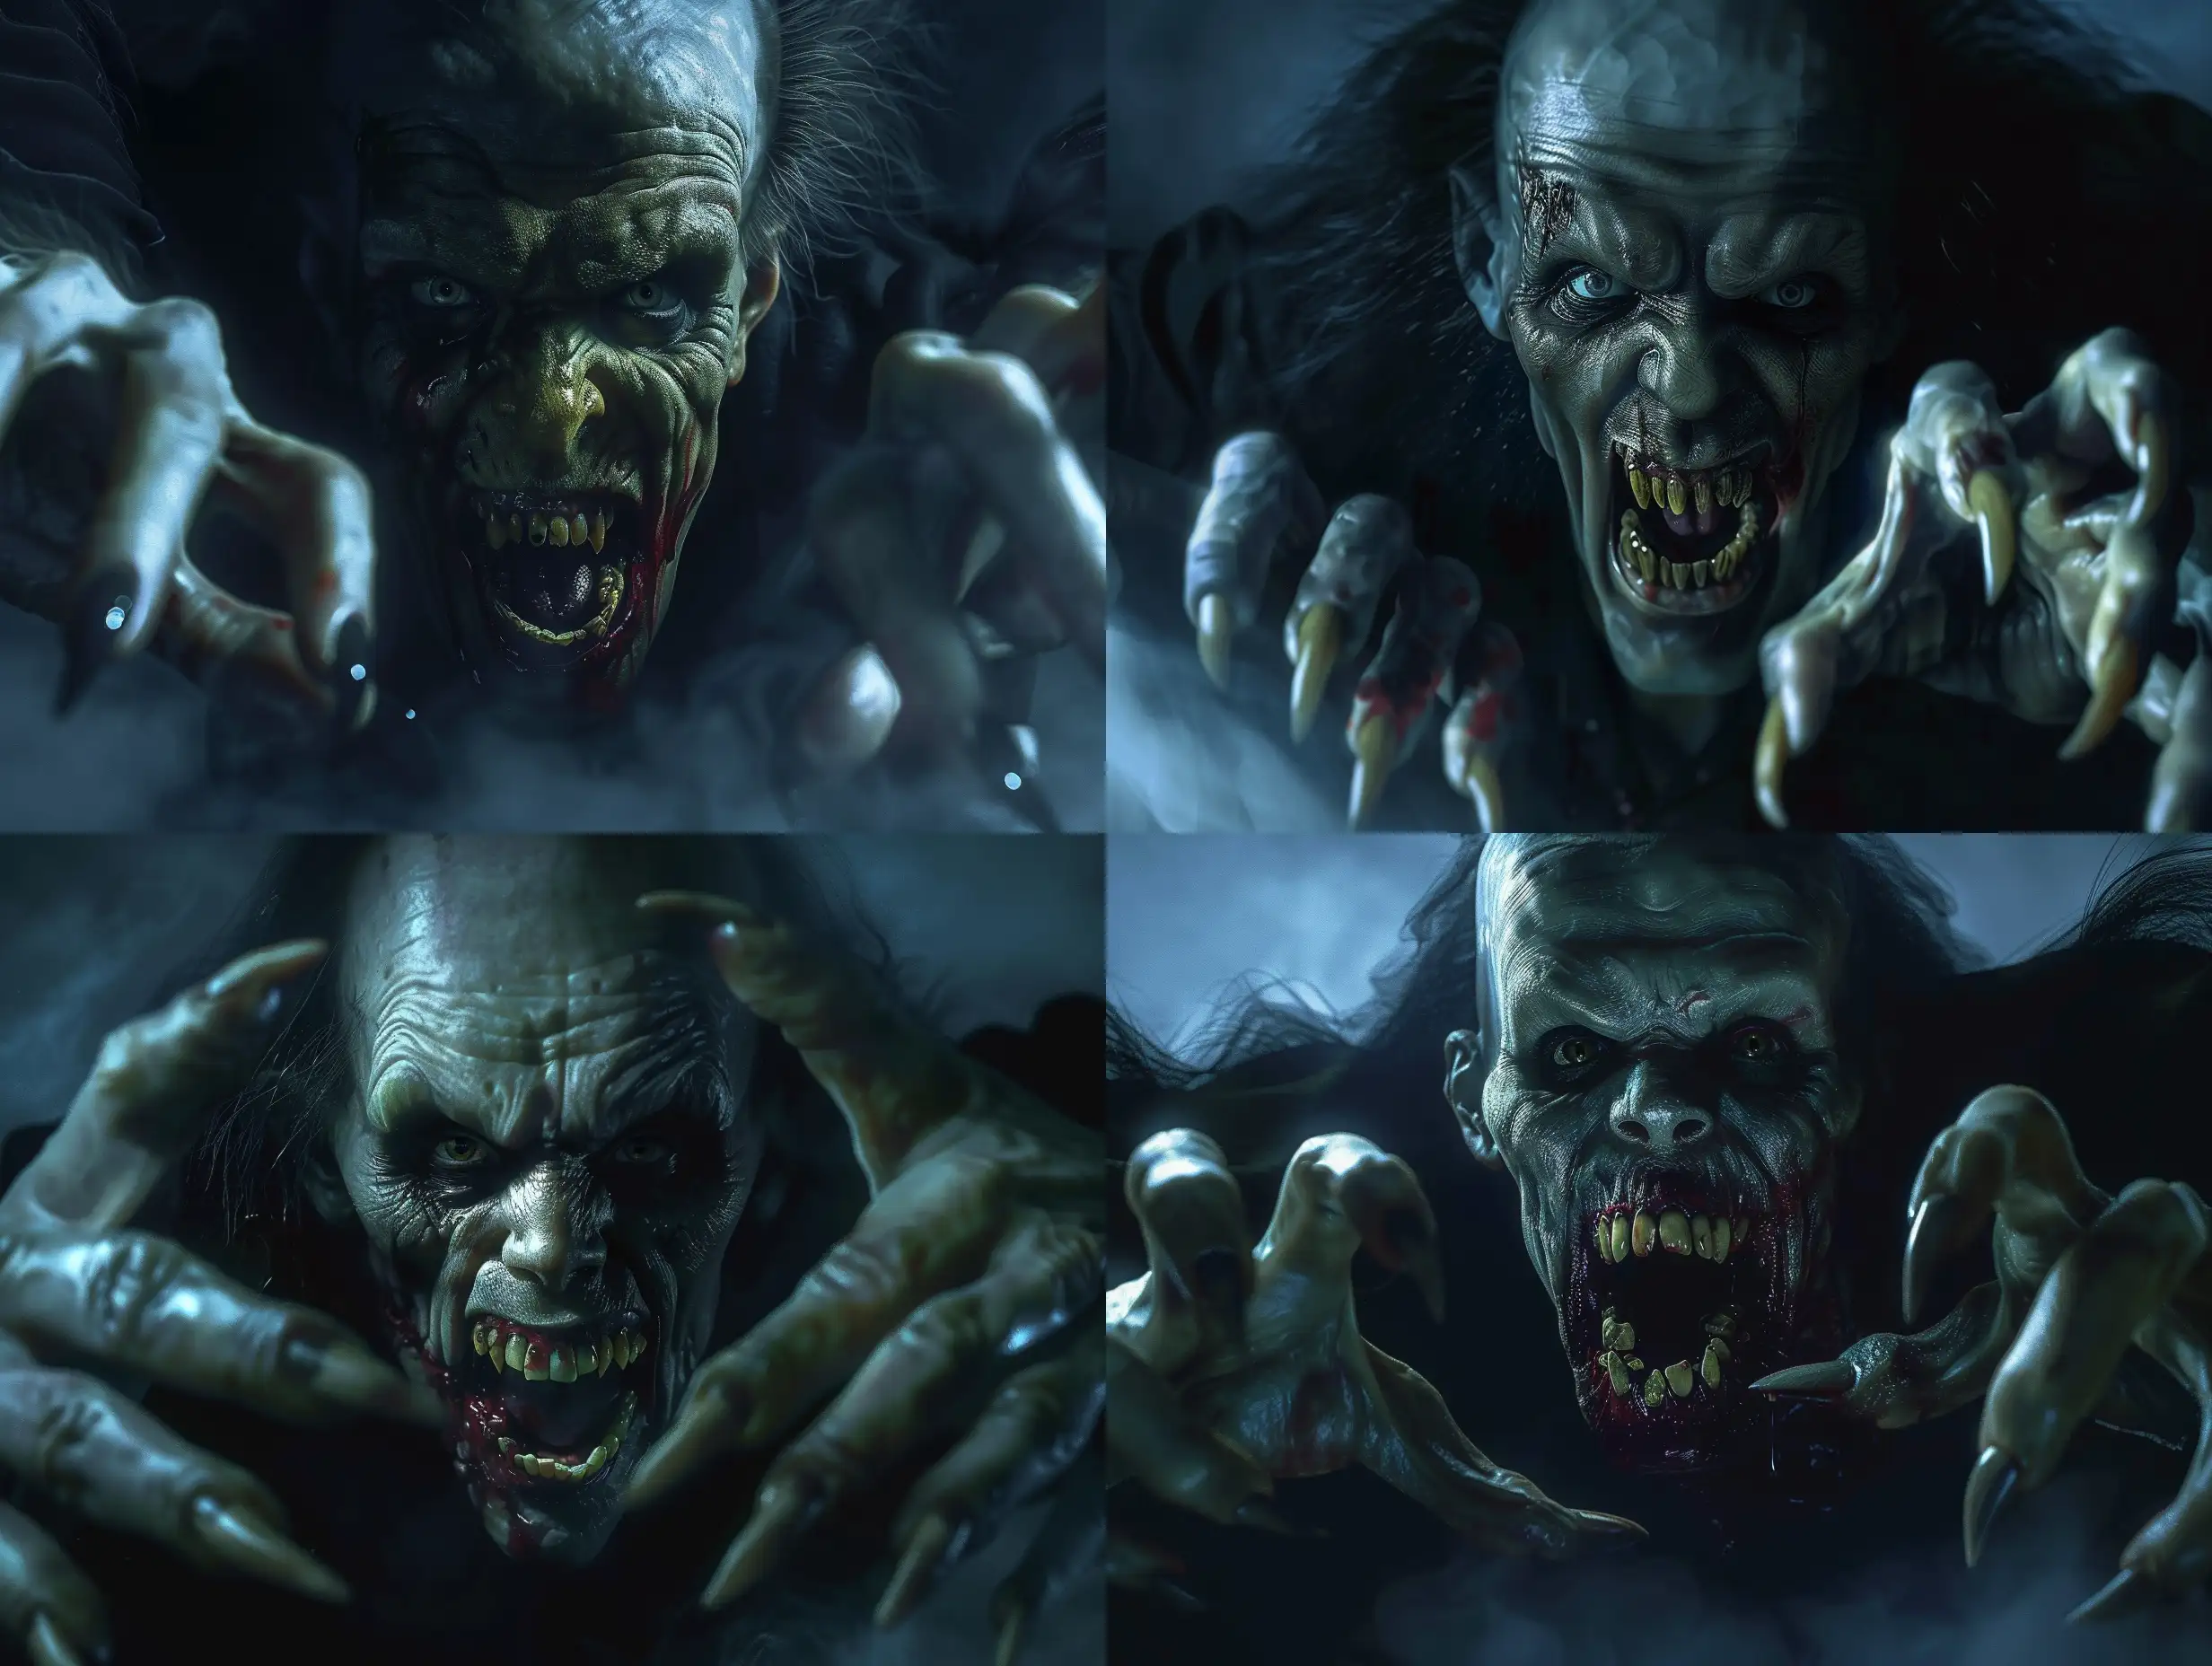 Photorealism nightmare scene of a monstrous female vampire with long, curved, pointed nails, exuding an aggressive and terrifying presence. Her pointed, crooked teeth form a scary expression amidst a dark and atmospheric setting. The high-quality depiction should capture the aggressive attack, emphasizing her predatory fangs and detailed nails in a hyper-realistic manner. The lighting should contribute to the horror atmosphere, ensuring a full-body portrayal with realistic hyper-detail. The character design should convey a playful yet menacing quality, with full anatomical accuracy including distinctly human hands with five fingers. The final image must be very clear without flaws, portraying the vampire with unparalleled photorealism.